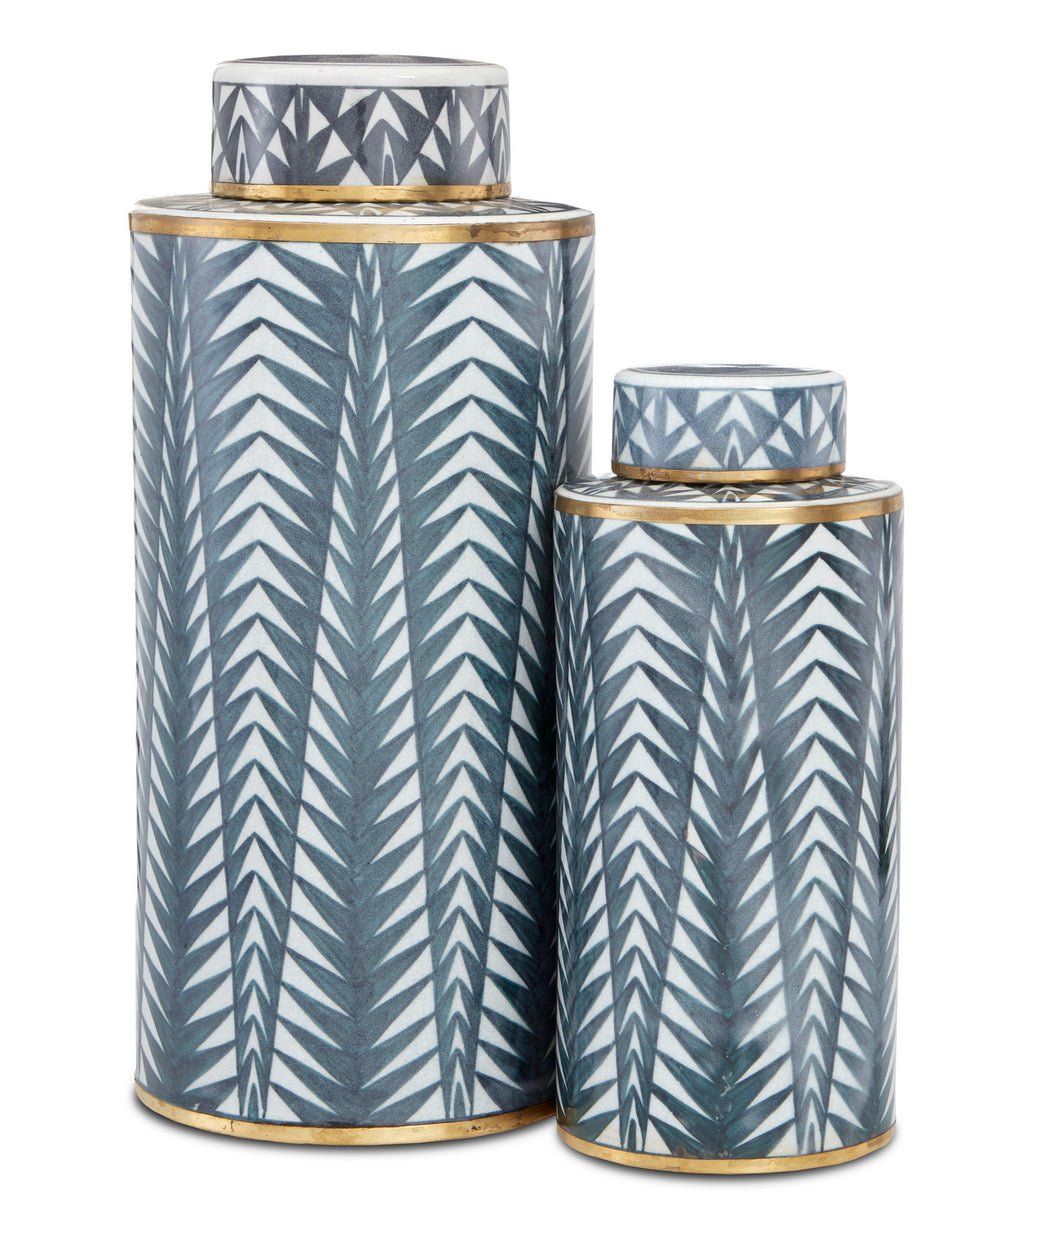 Currey and Company - 1200-0412 - Canister Set of 2 - Art